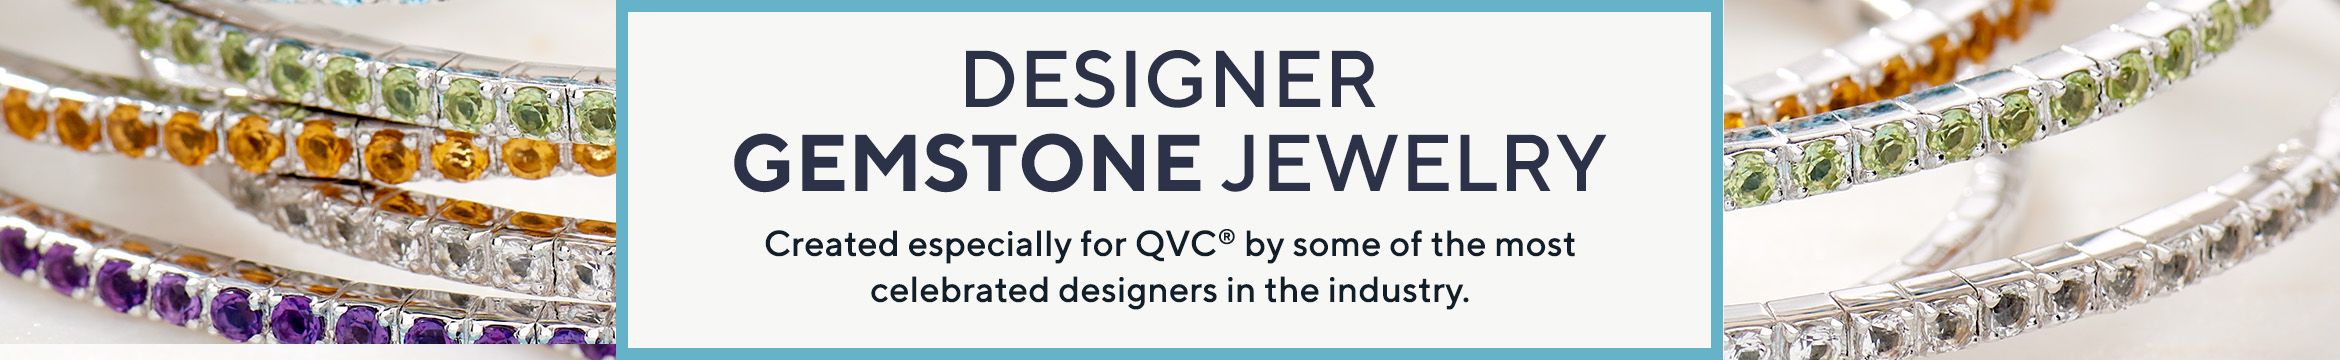 Designer Gemstone Jewelry.  Created especially for QVC® by some of the most celebrated designers in the industry.